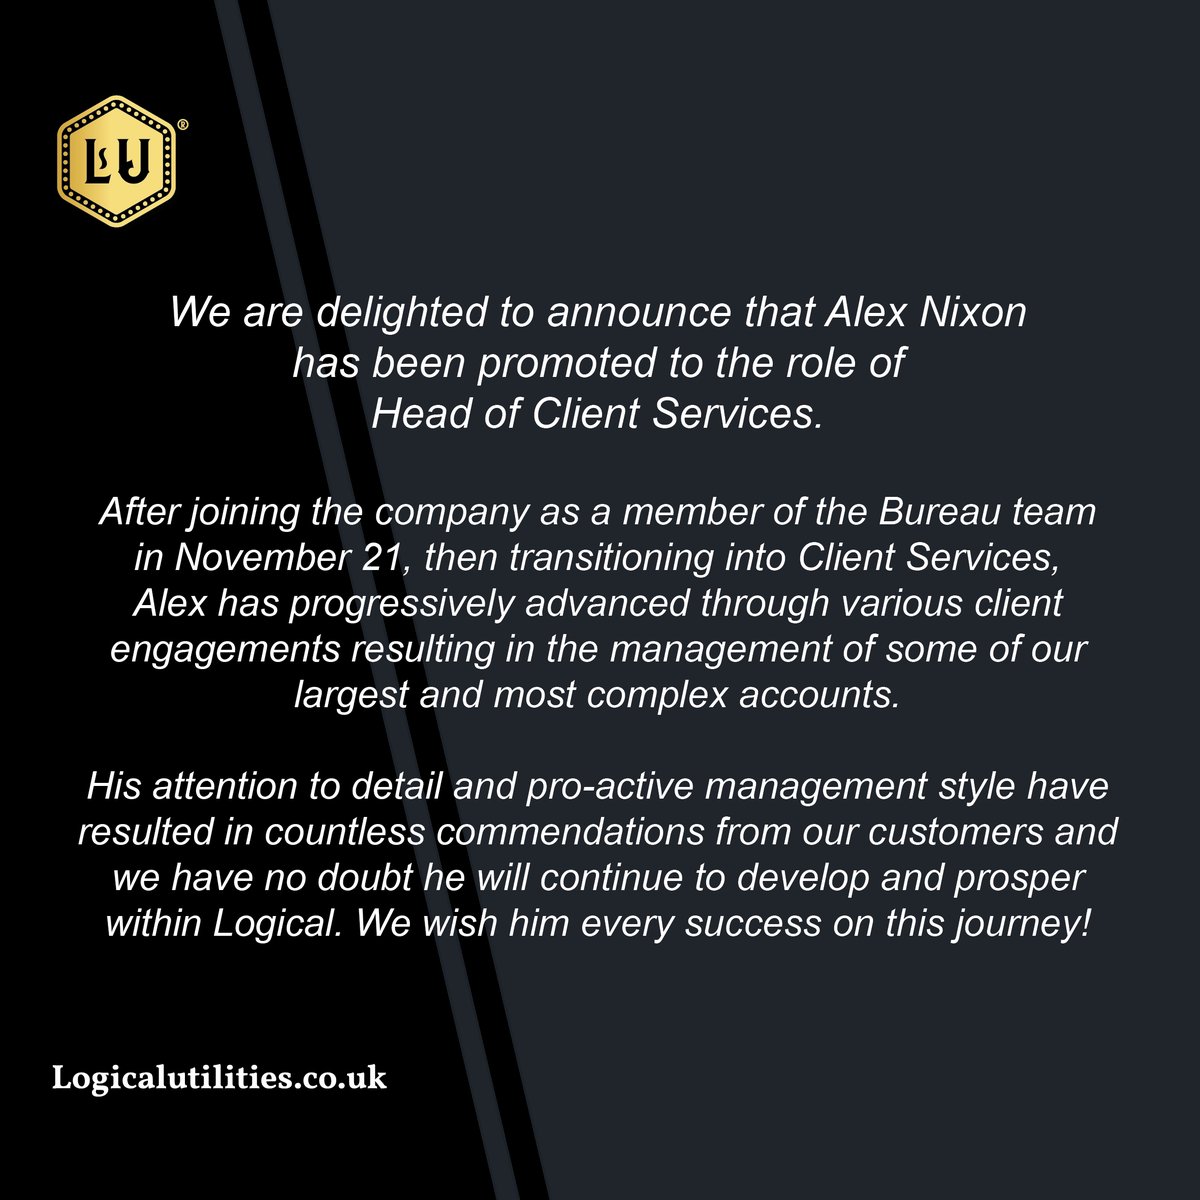 ✨ We are delighted to welcome Alex Nixon into his new role as Head of Client Services.✨ 

#welcome #newrole #logicalutilities #logicalutilitiescompany #cheltenham #energyindustry #sustainableenergy